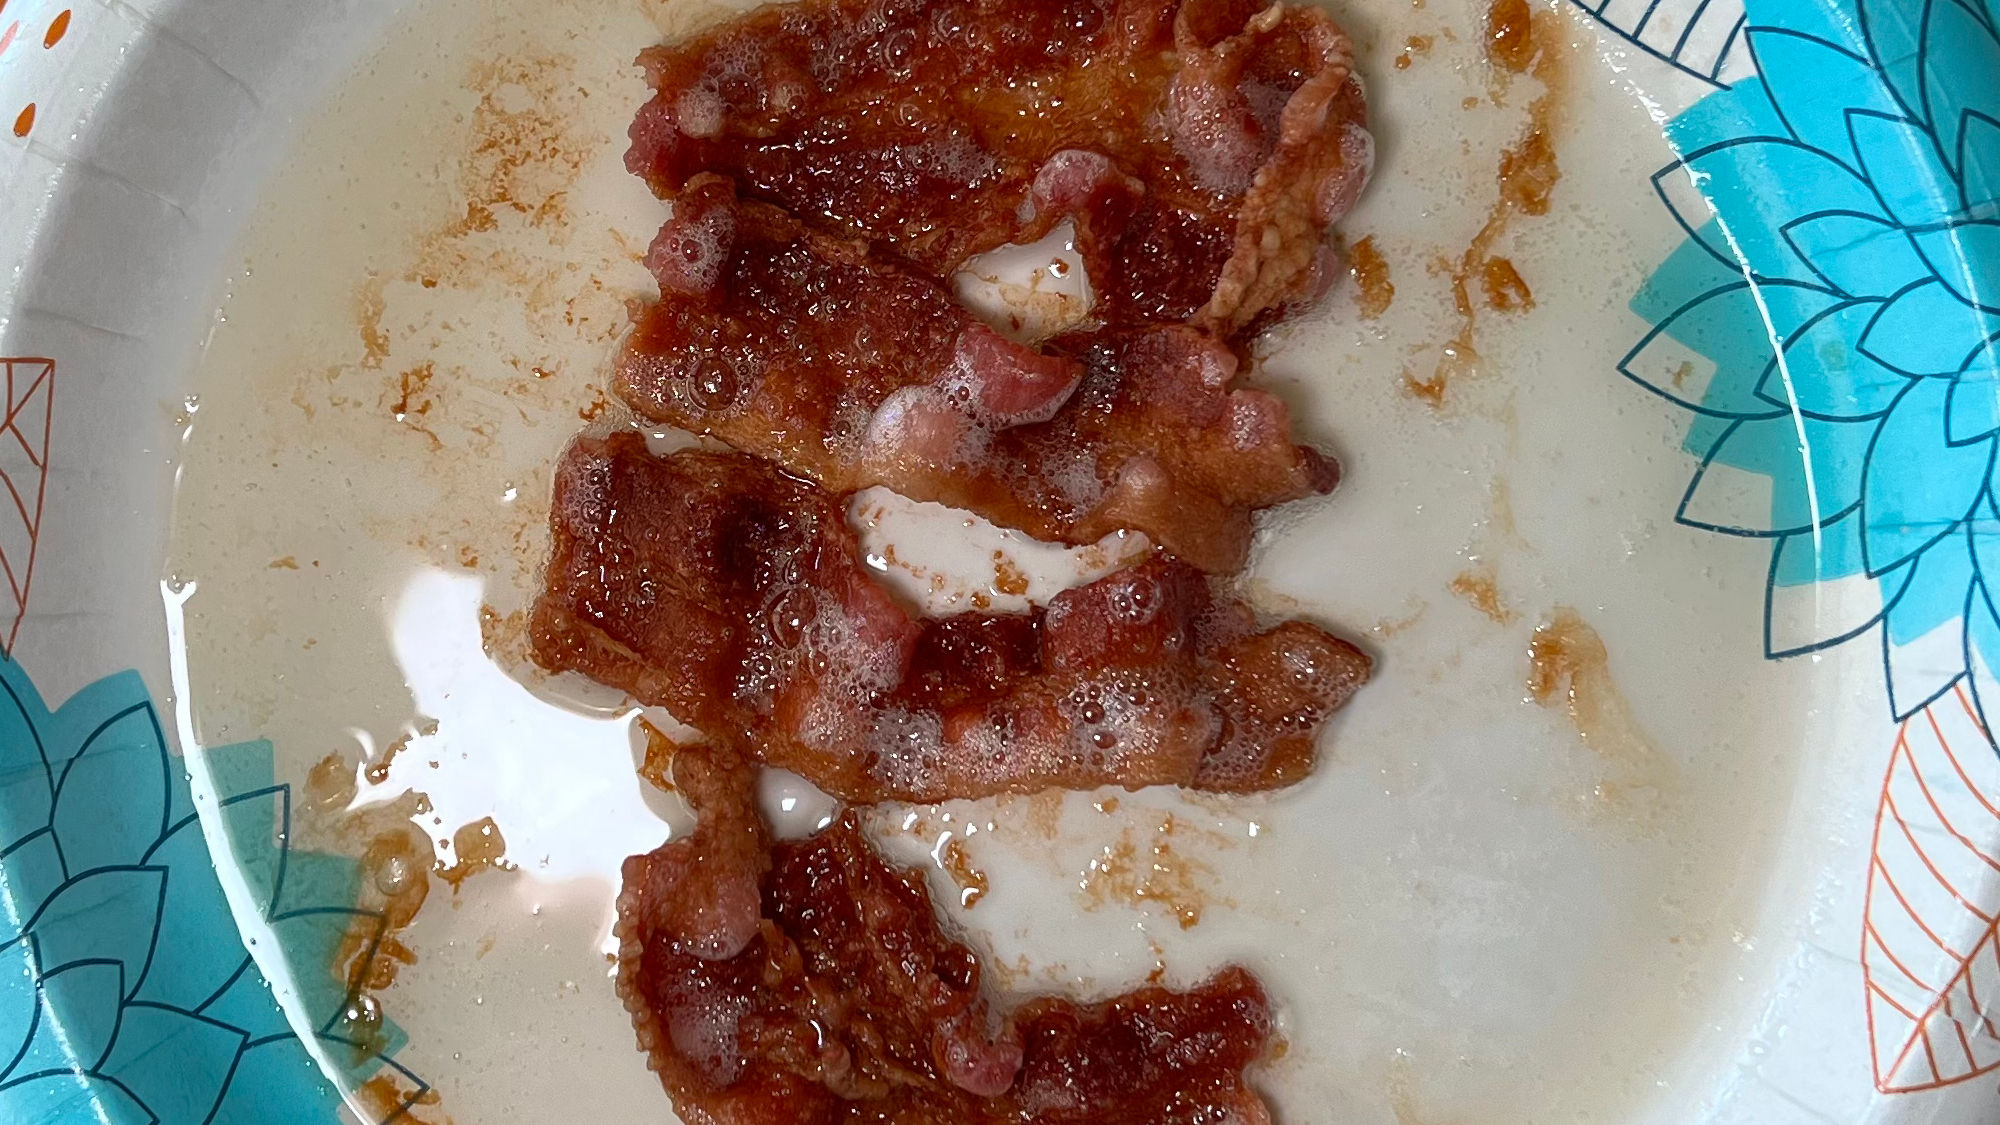 Microwave Oven Bacon 3 Minutes